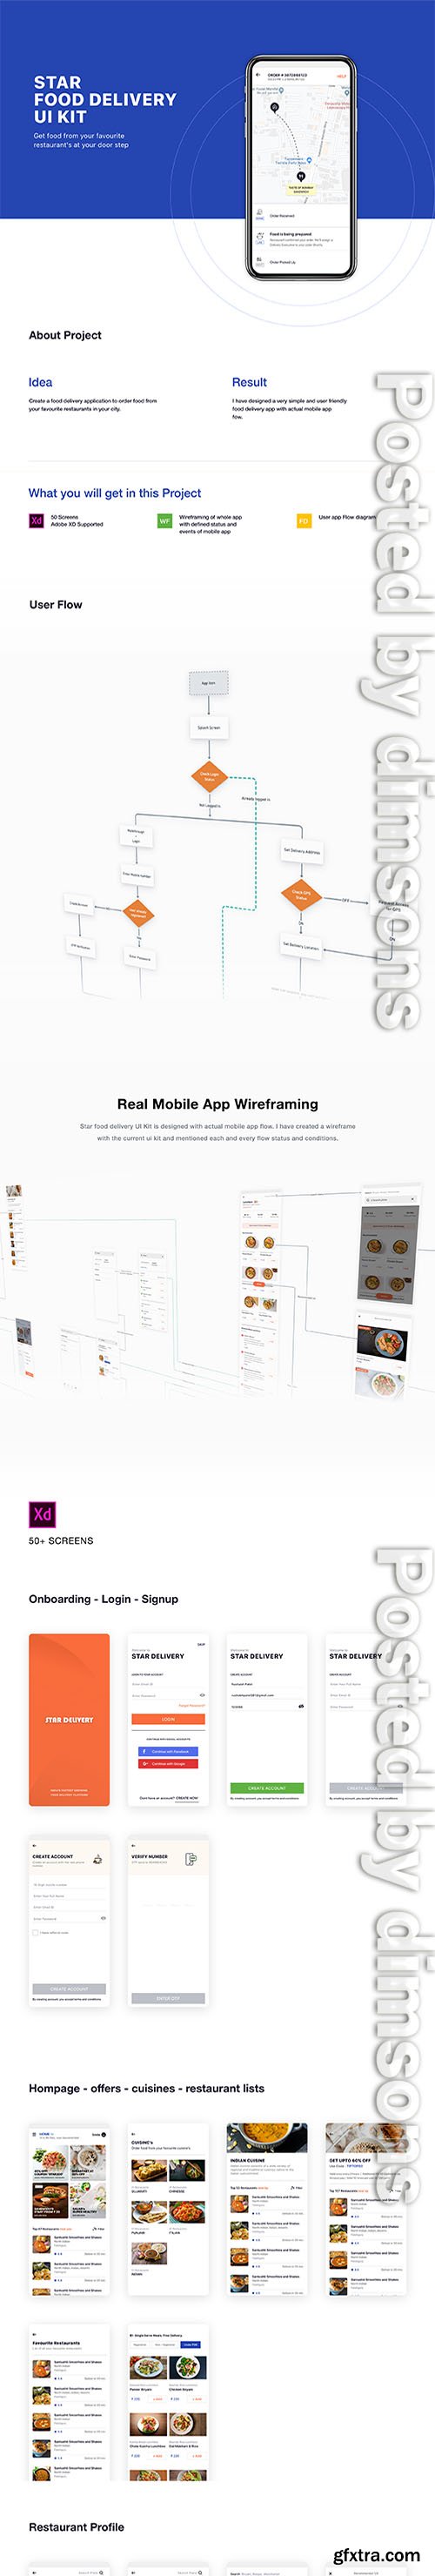 Star Food Delivery UI KIT